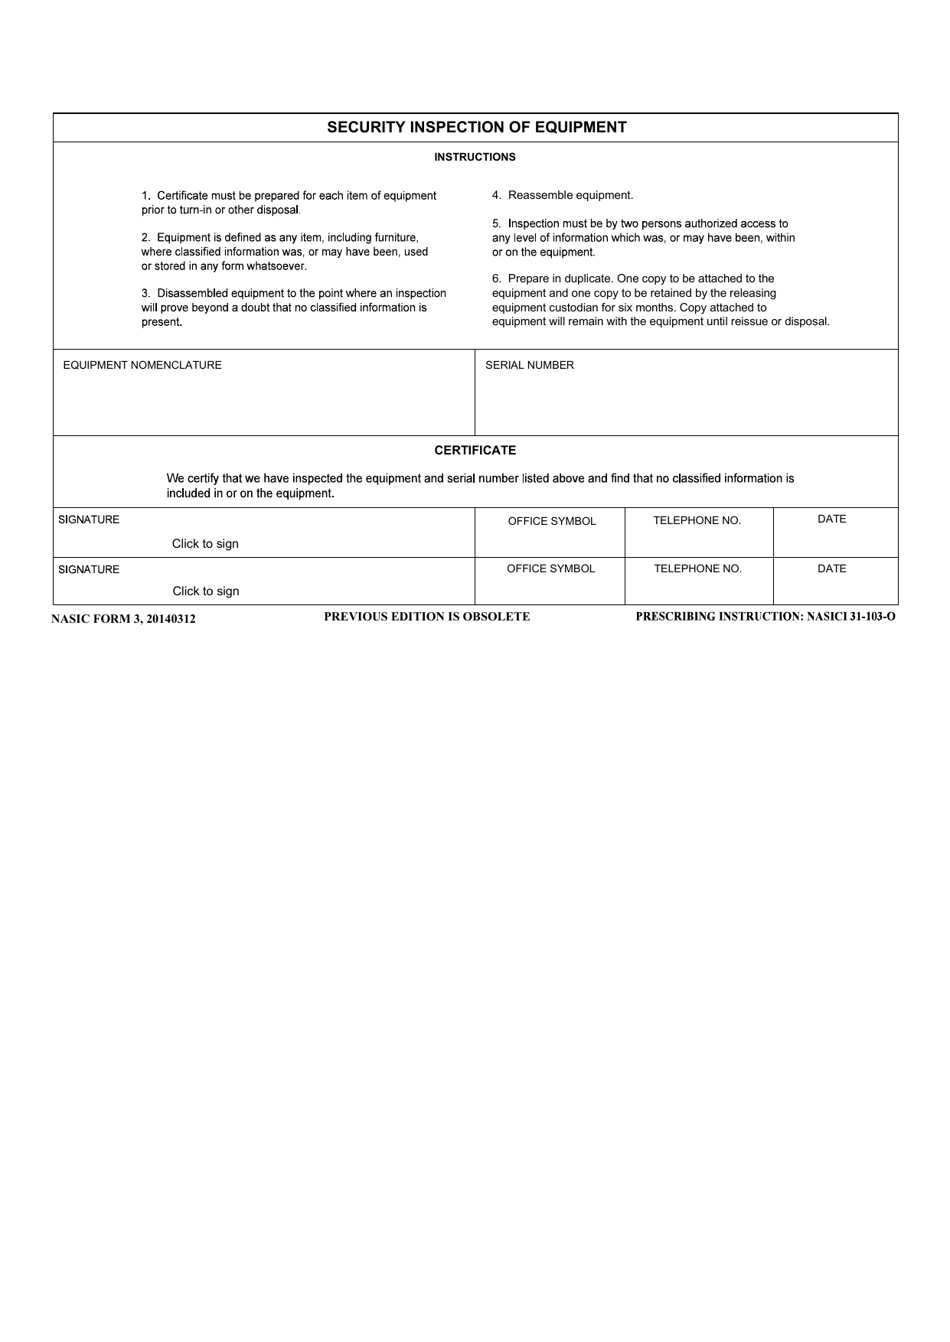 NASIC Form 3 Security Inspection of Equipment, Page 1